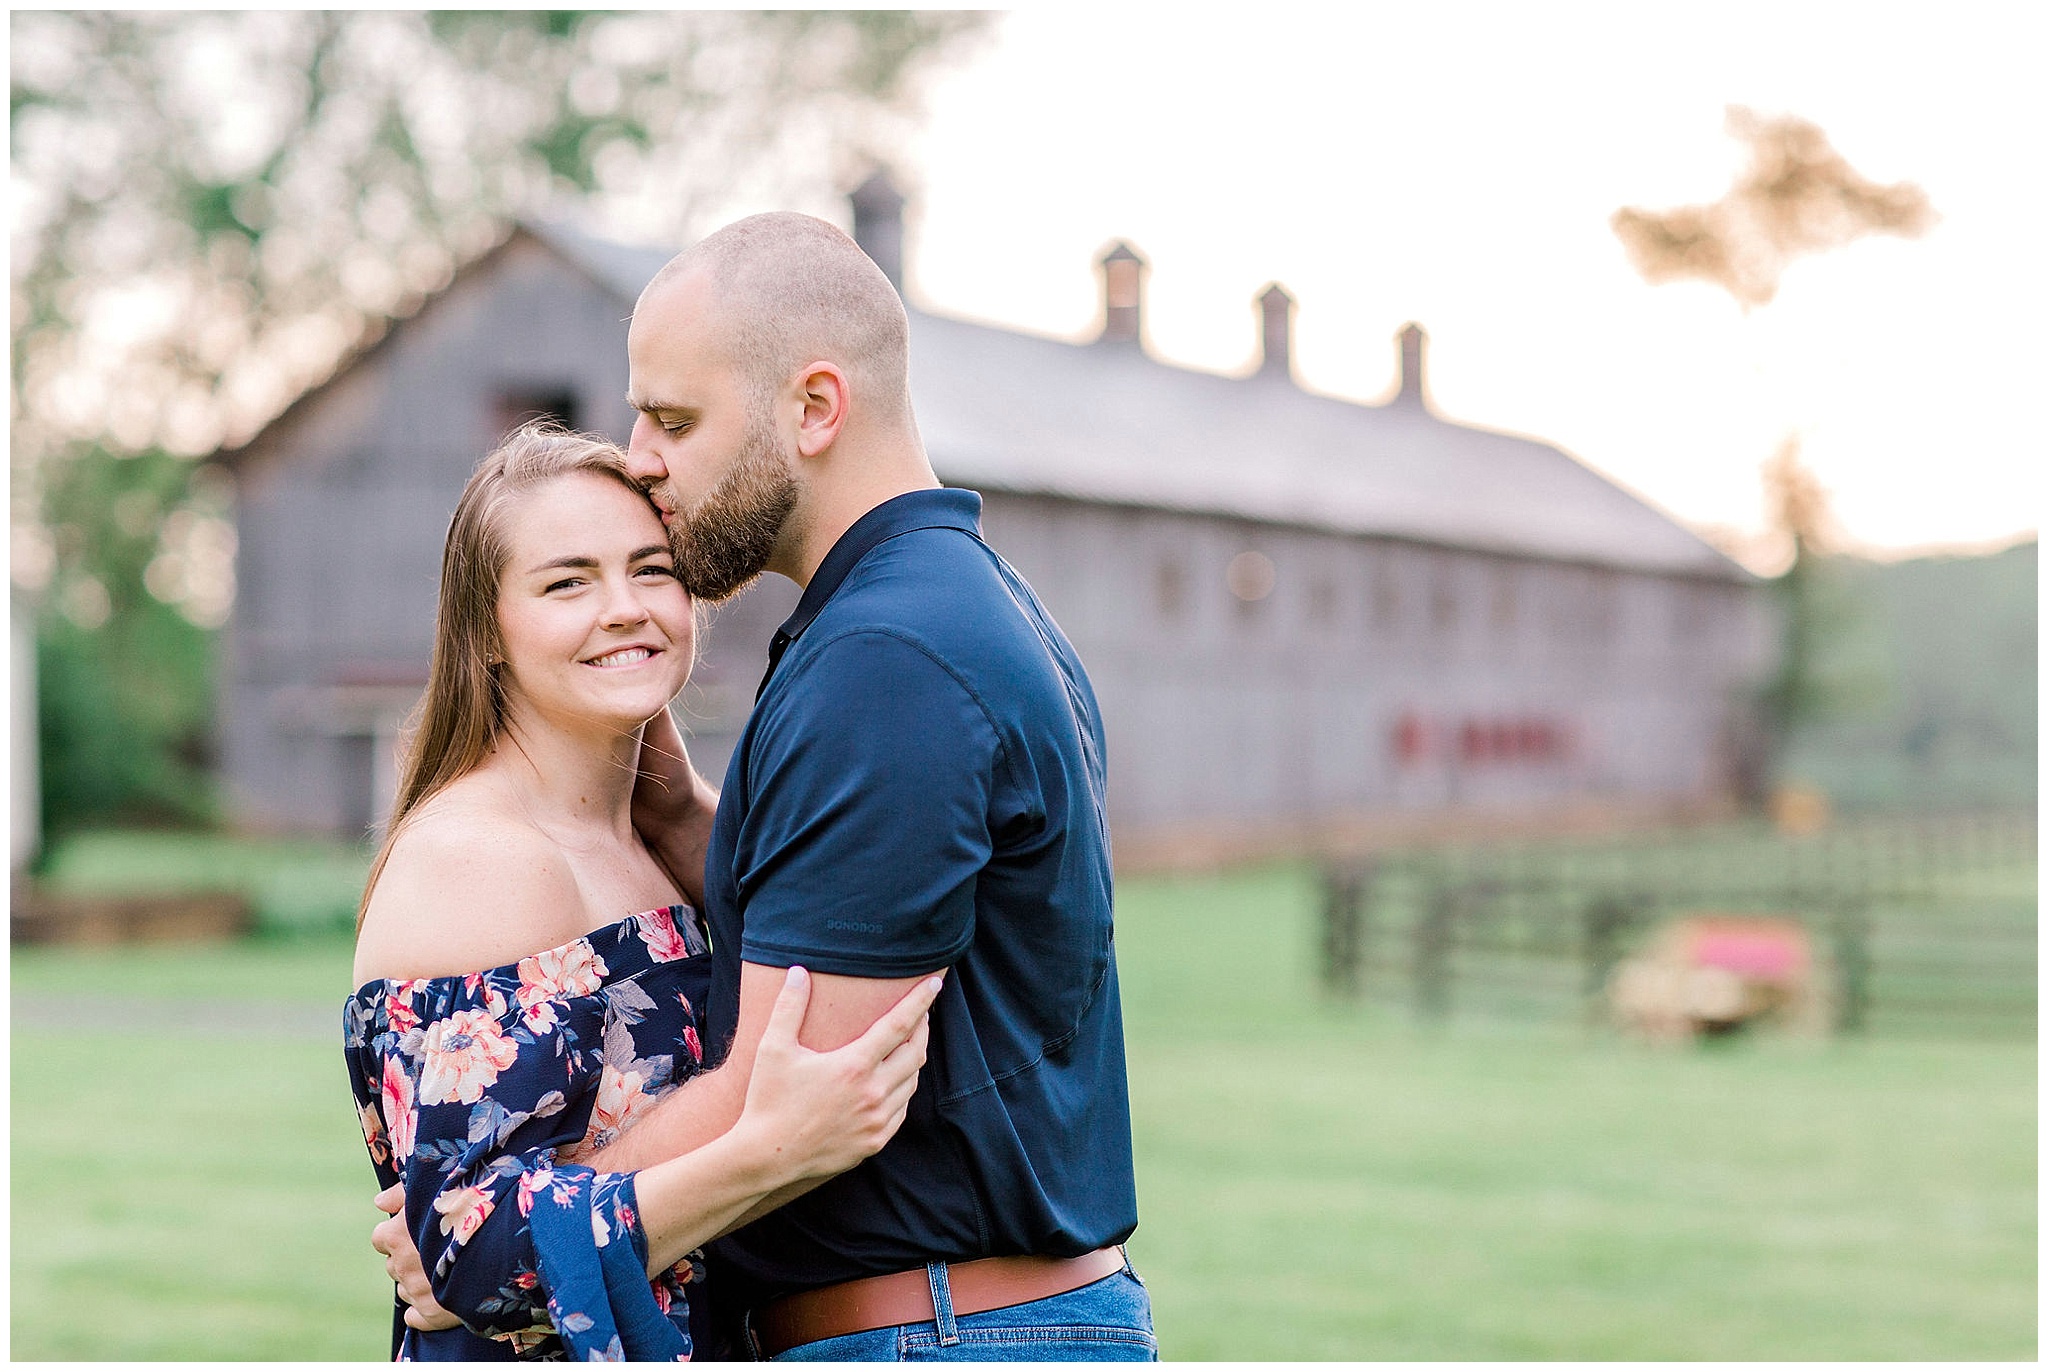 engagement photo at sylvandside farm in loudon county virginia, sylvanside farm, slyvanside farm wedding, slyvanside farm engagement, northern virginia wedding photographer, dc wedding photographer